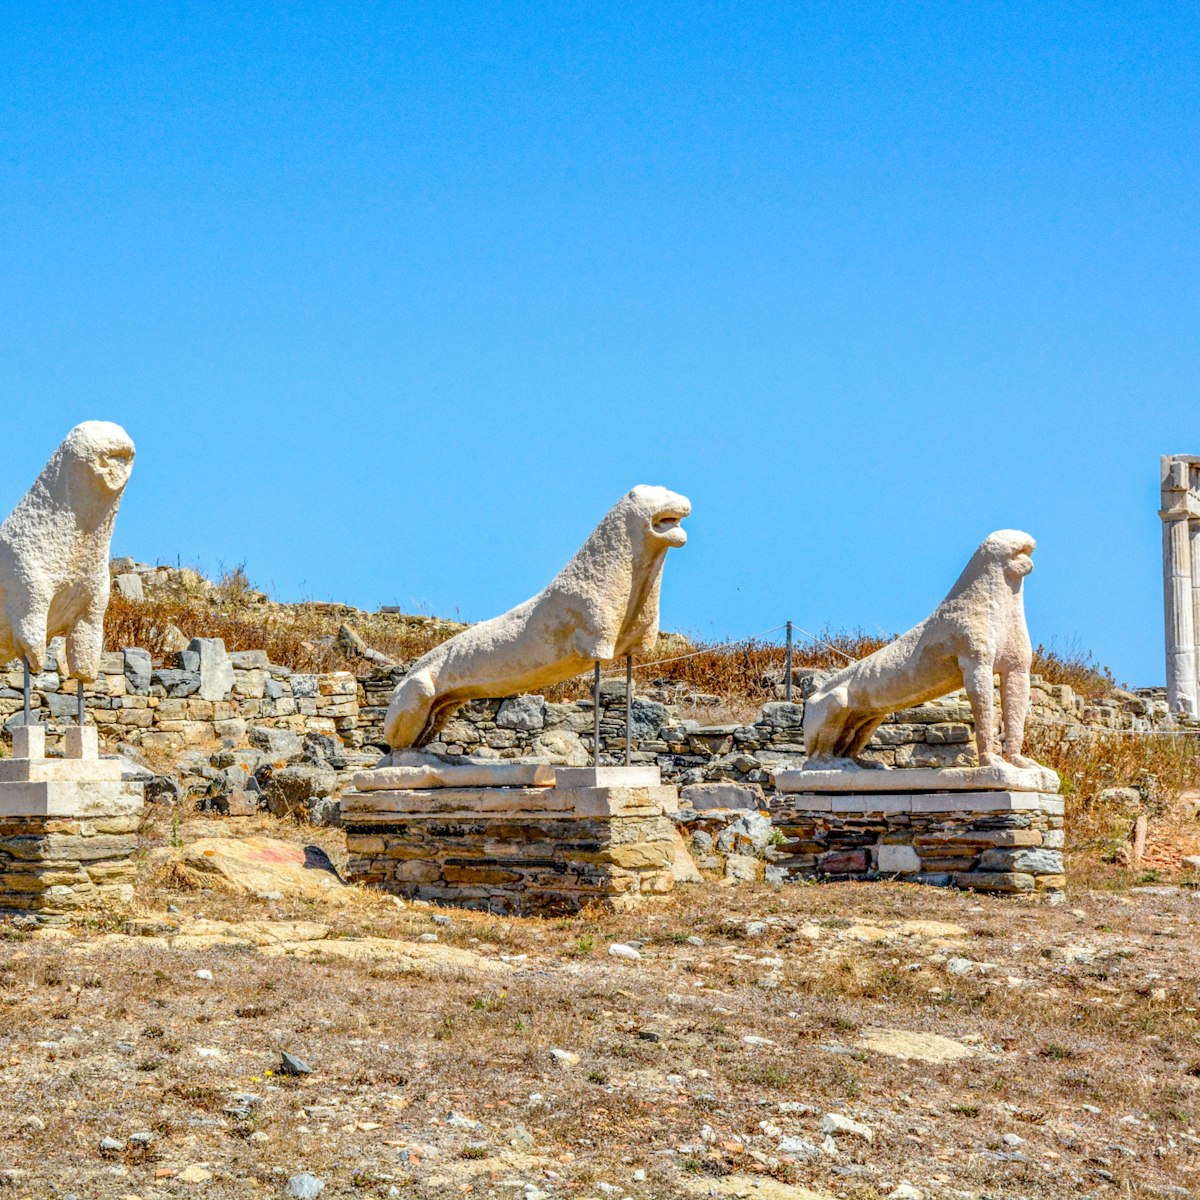 Terrace of the Lions, the famous symbol of Archaeological Site of Delos, Delos Island, Cyclades, Greece.